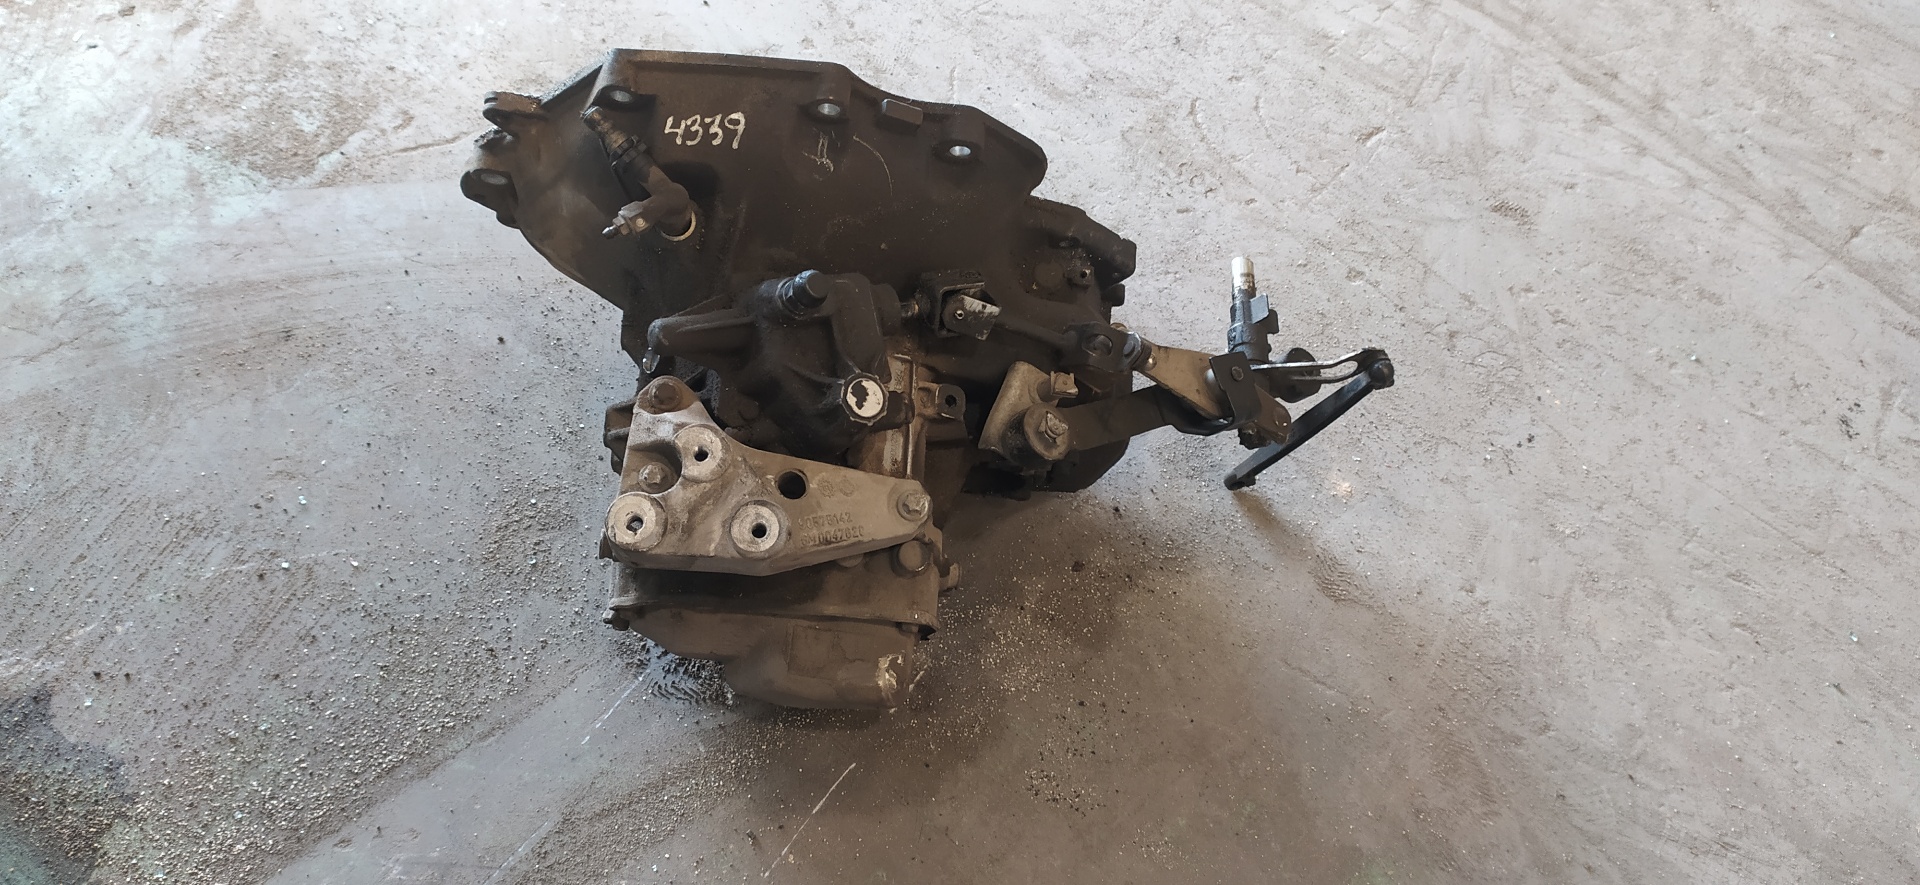 OPEL Astra H (2004-2014) Gearbox 90400209, 0076124, M79 23815350